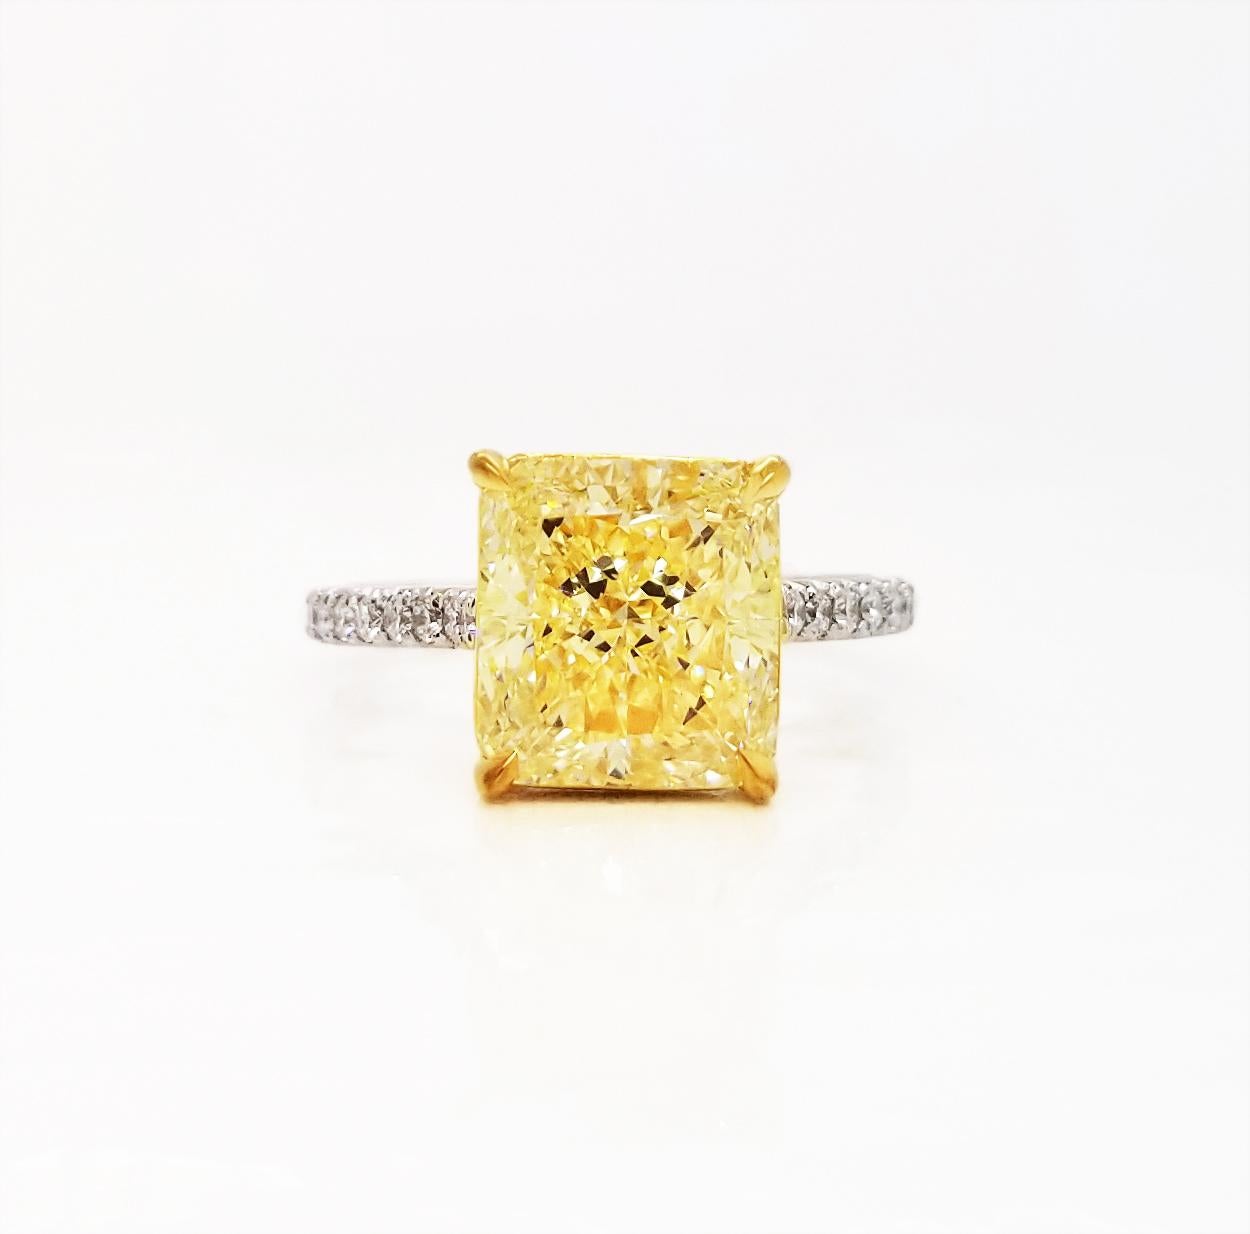 From SCARSELLI, this 4.16 carat fancy light yellow diamond VVS1 GIA certified (see attached certificate picture for detailed stone information) set in a mounting hand made with yellow 18k gold seat and prongs with a platinum shank. Along on the